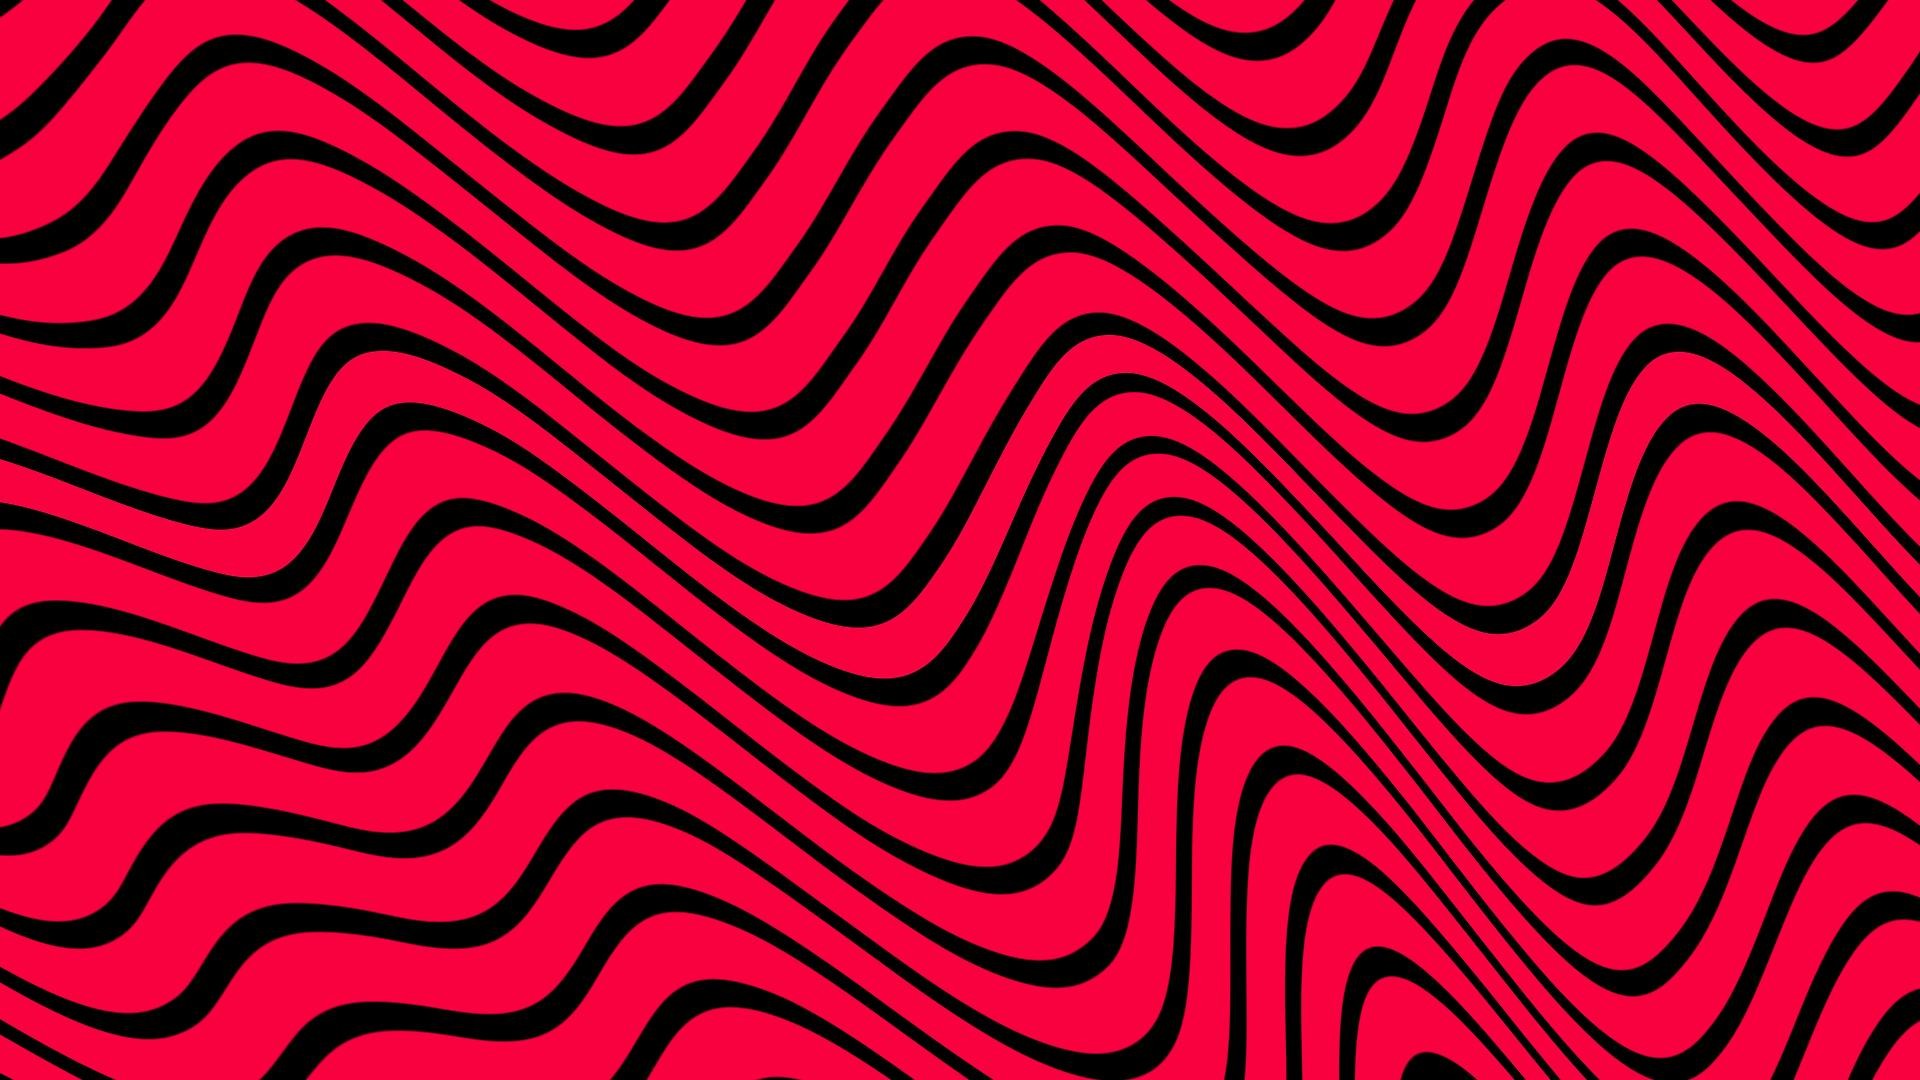 1920x1080 I made this PewDiePie's wavy background! You can use it to your videos,  pictures, and use it as a desktop wallpaper. Hope you like it!